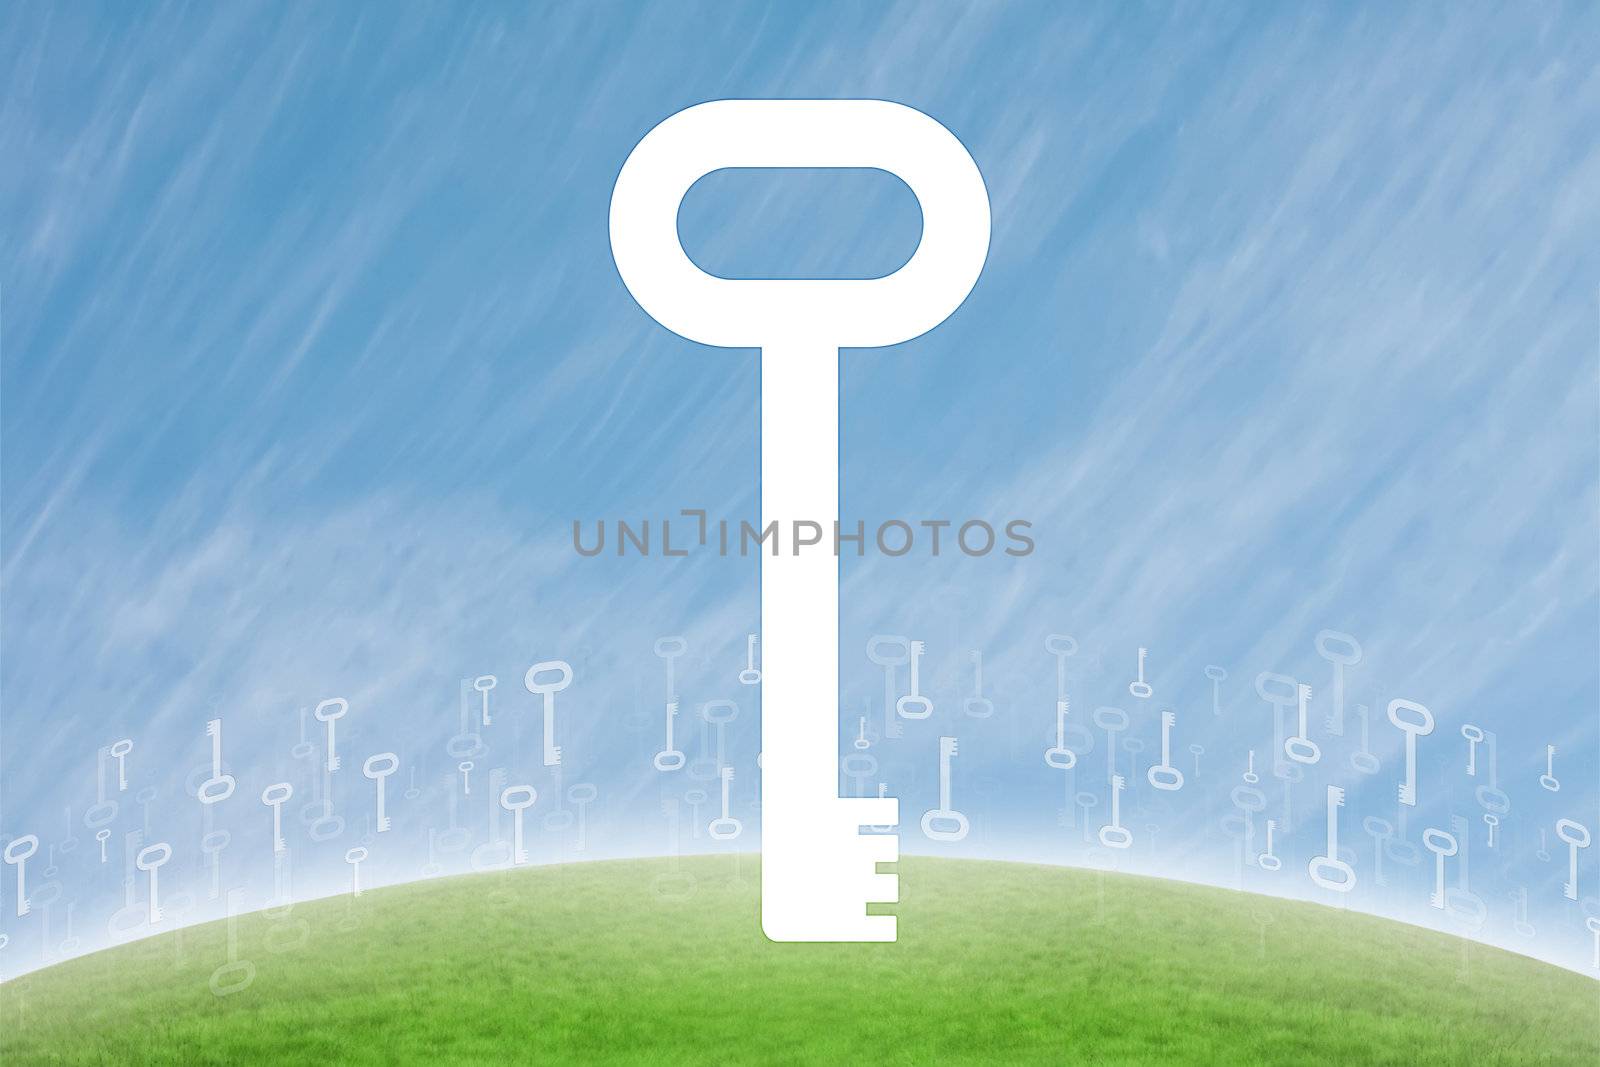 Beautiful sceneric background with green hill and blue cloudy sky with a key symbol in the middle.